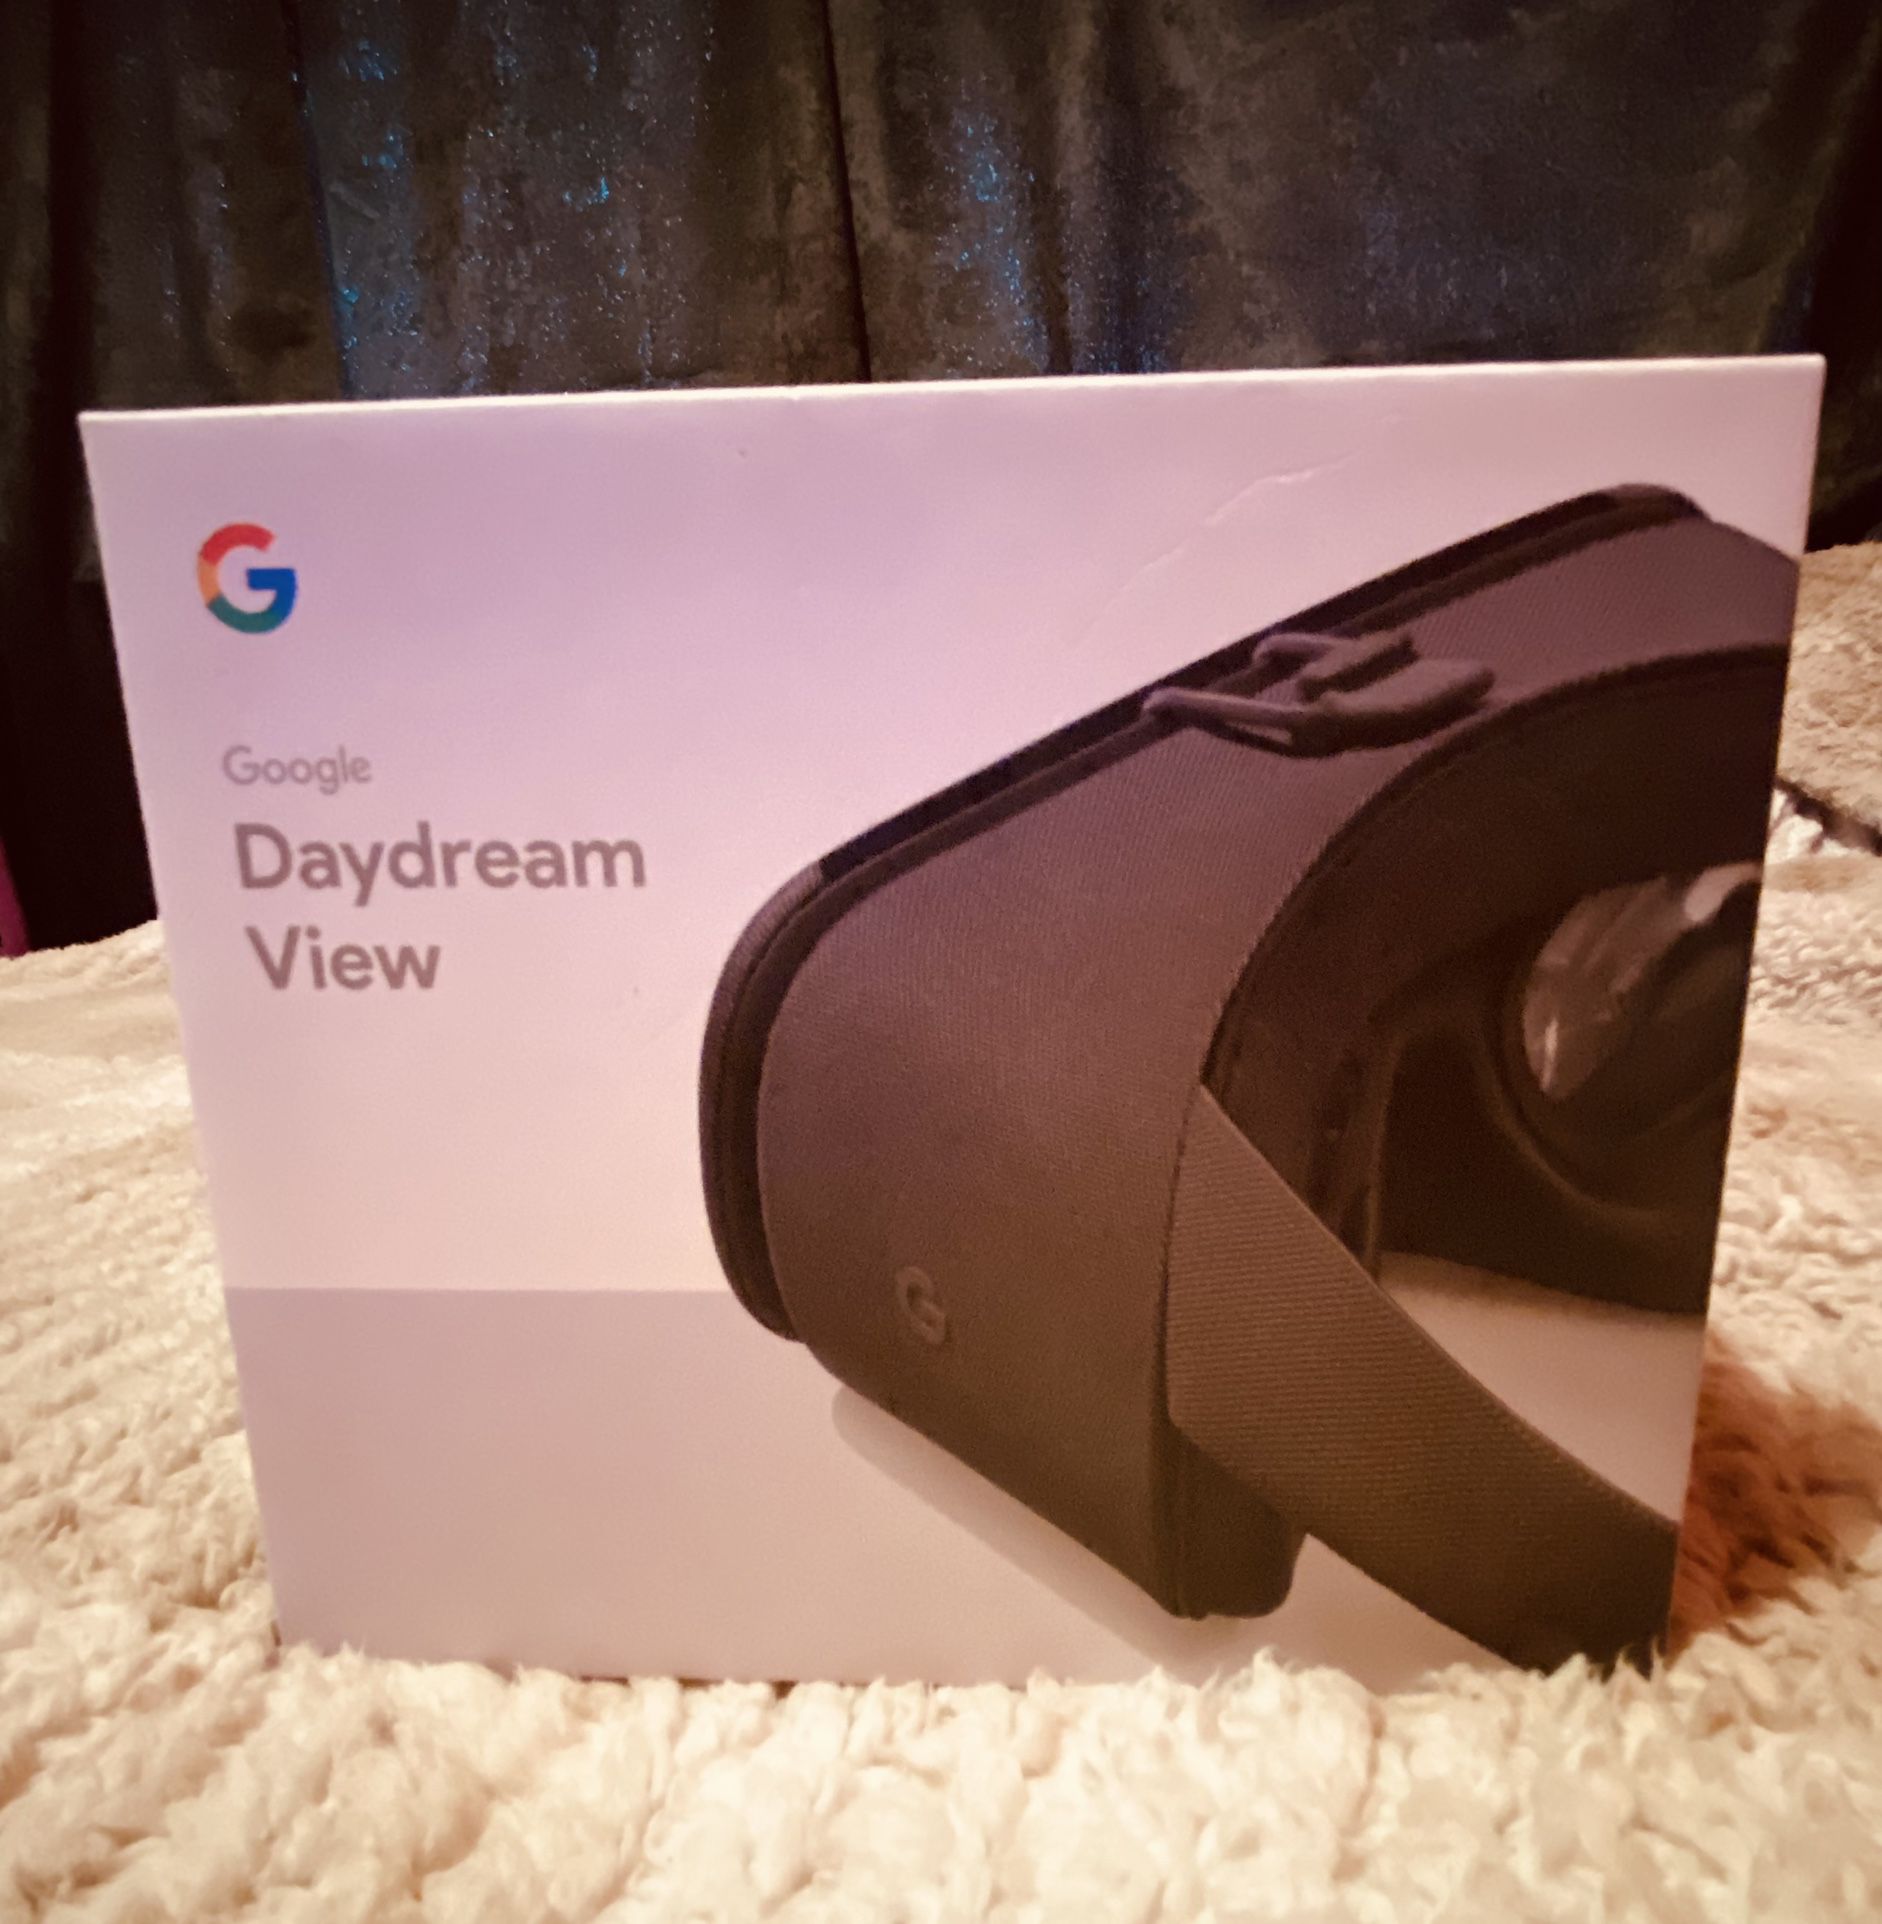 Google Daydream View Vr Headset. New Never Opend.